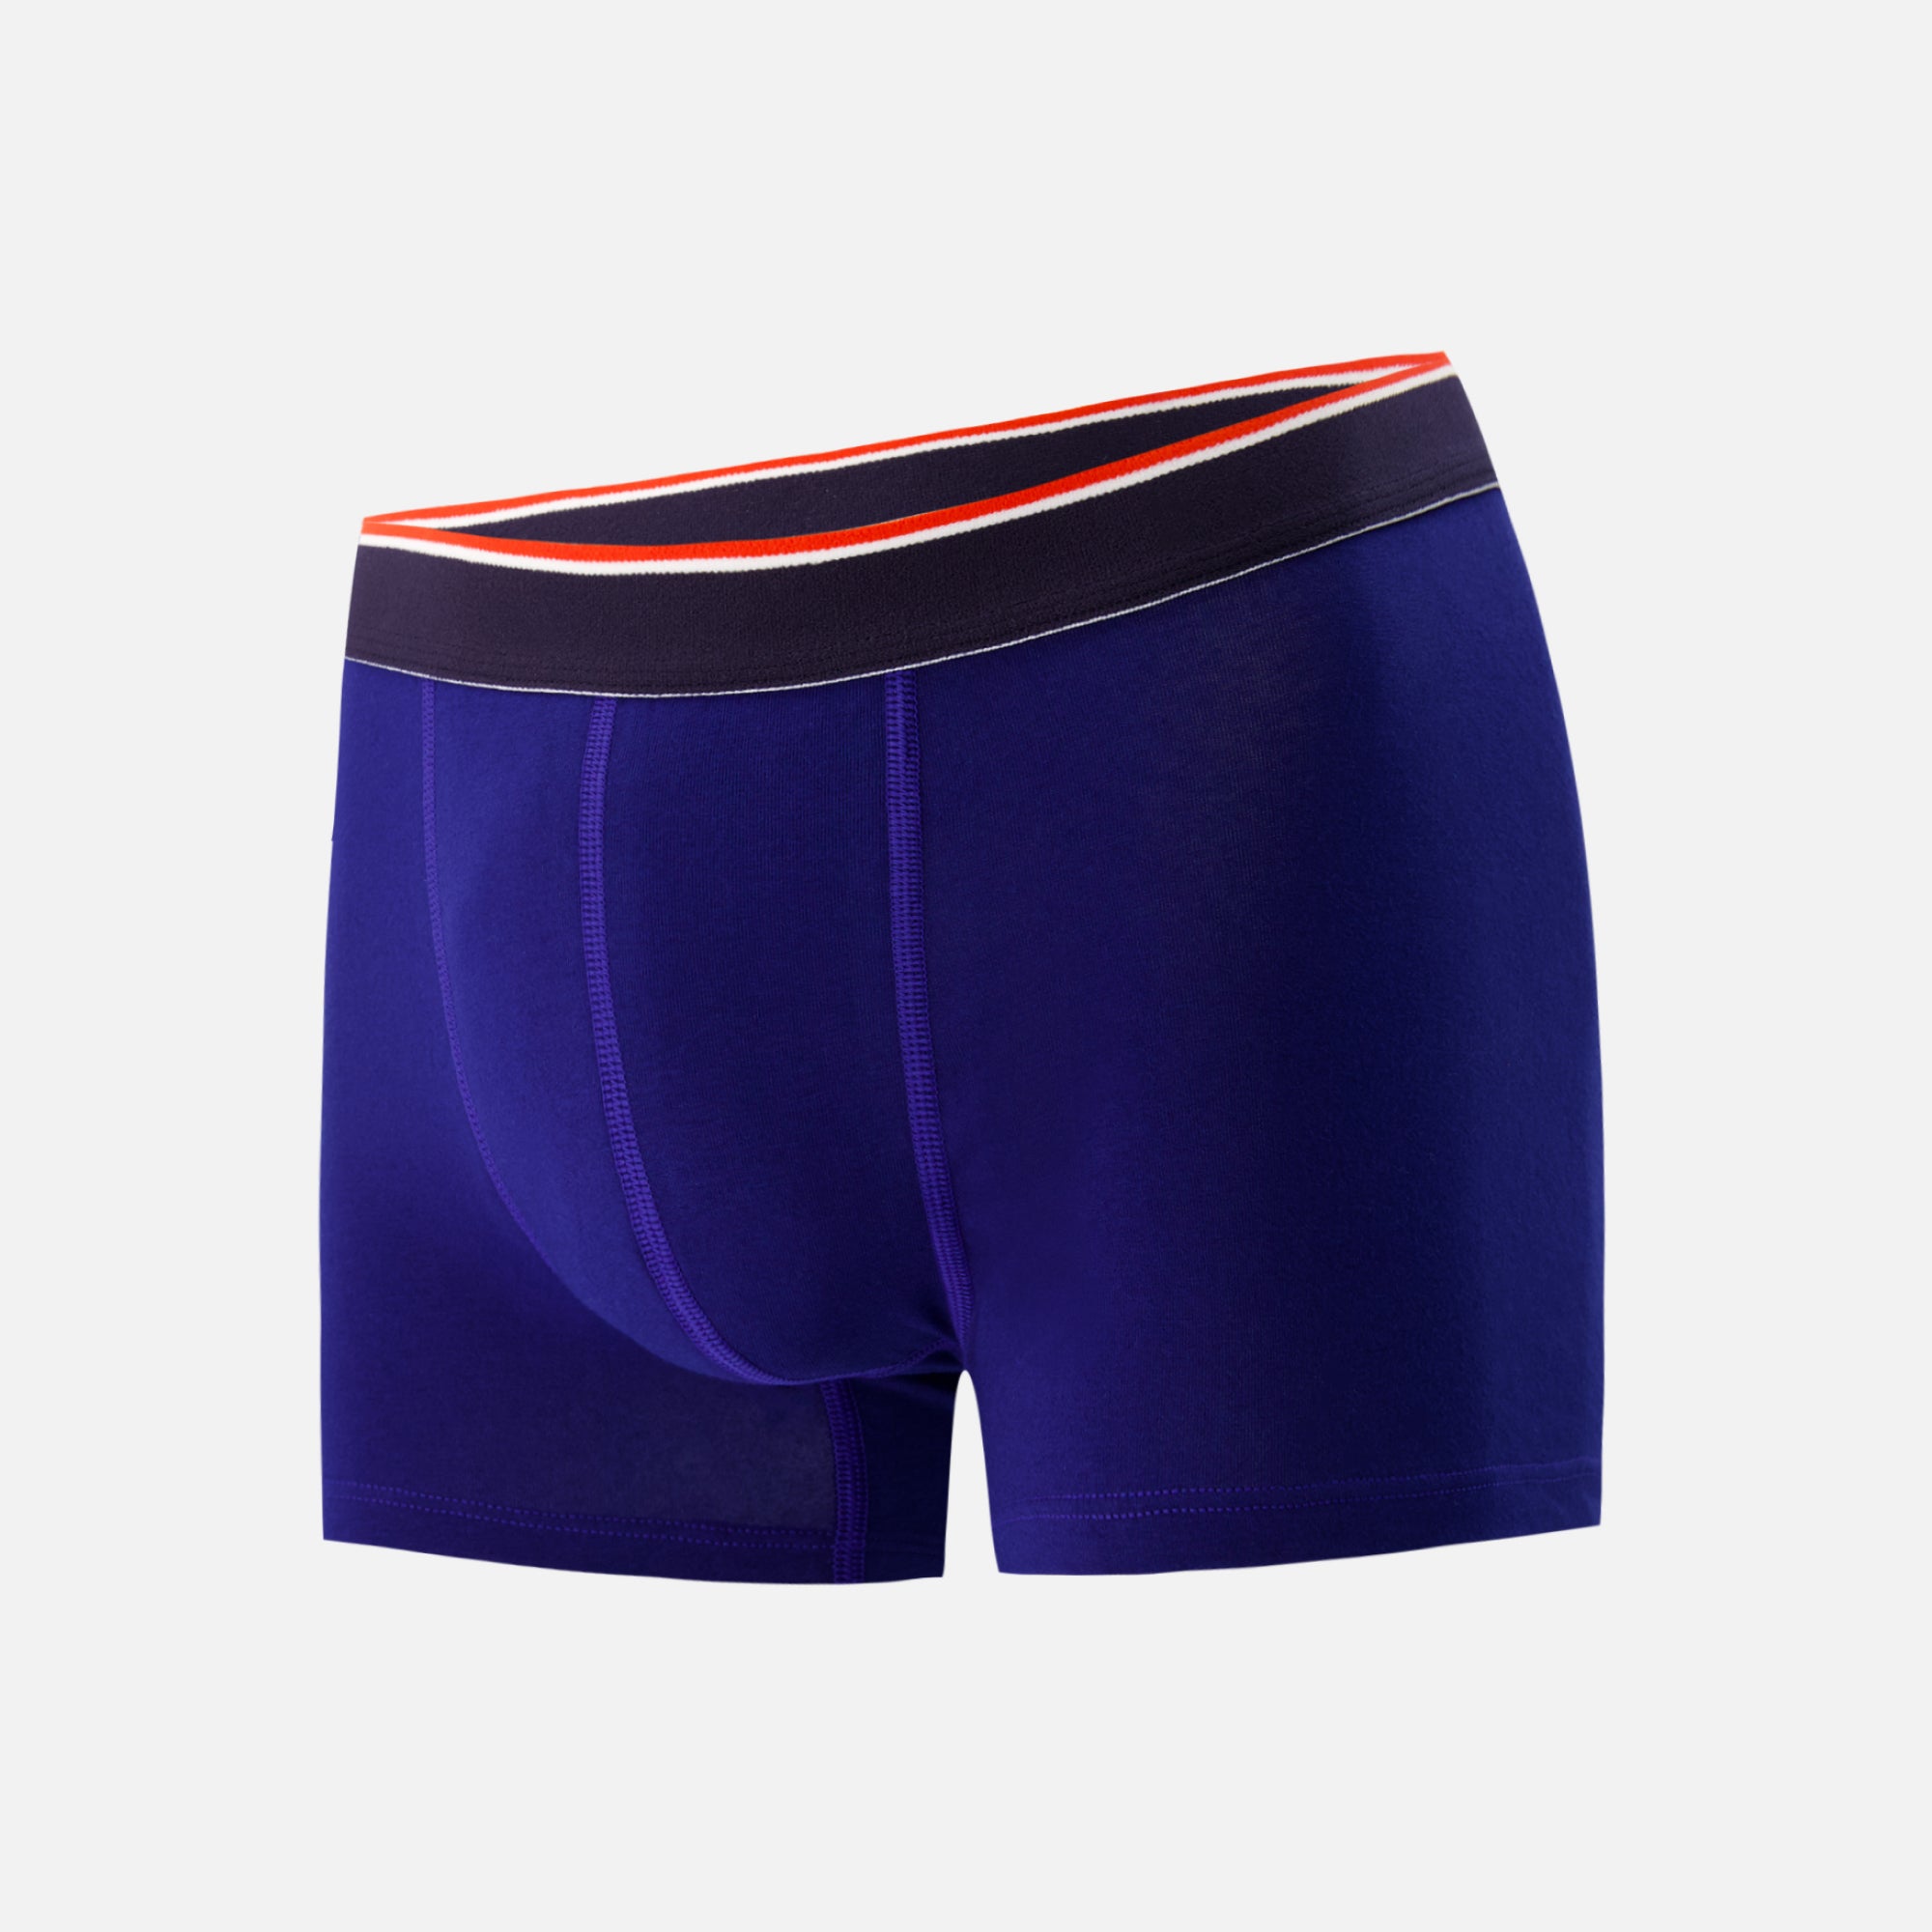 Collection - Men's classic boxers - 1